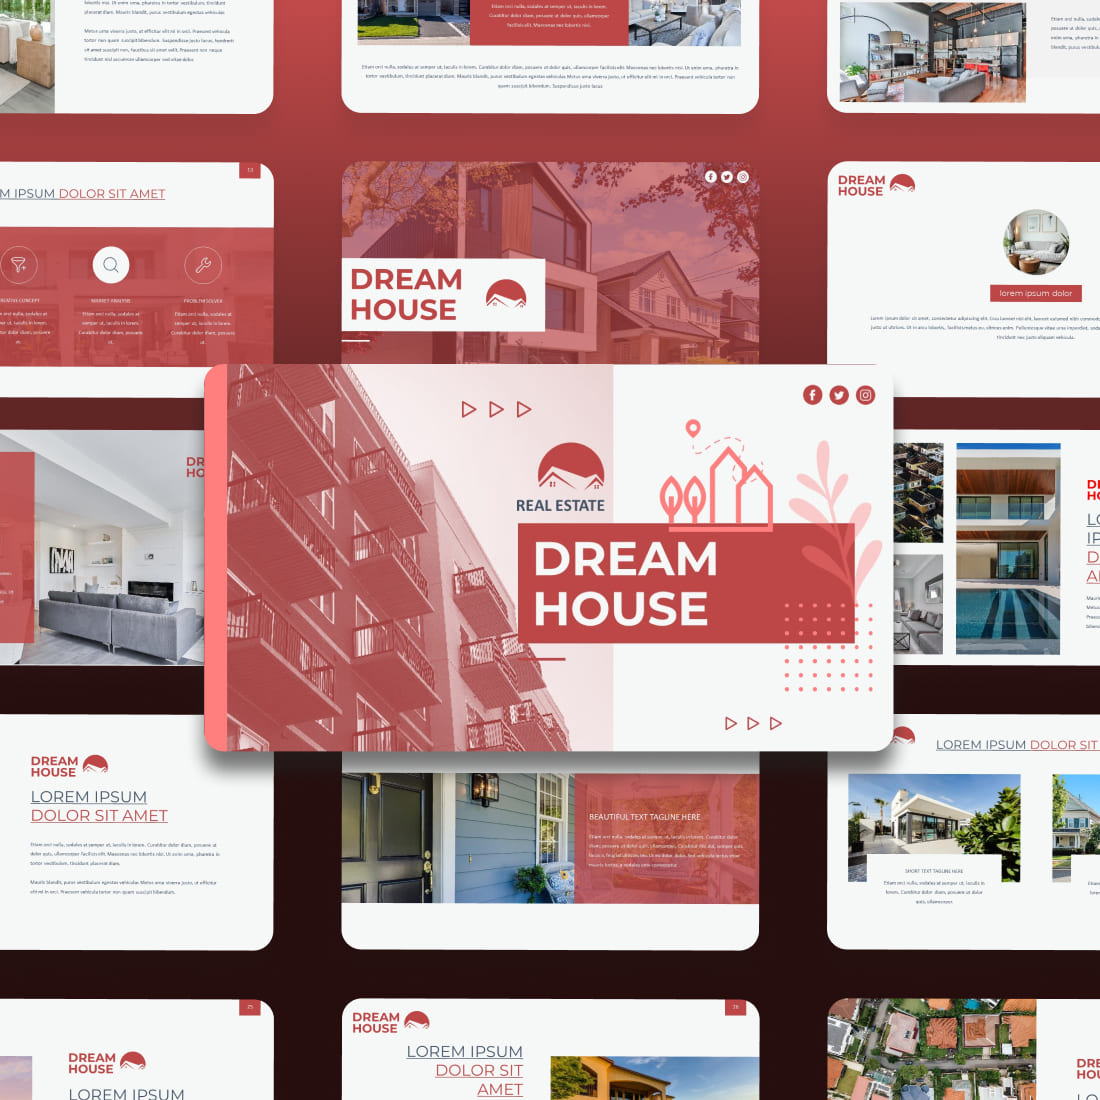 Dream House Keynote Template cover image.